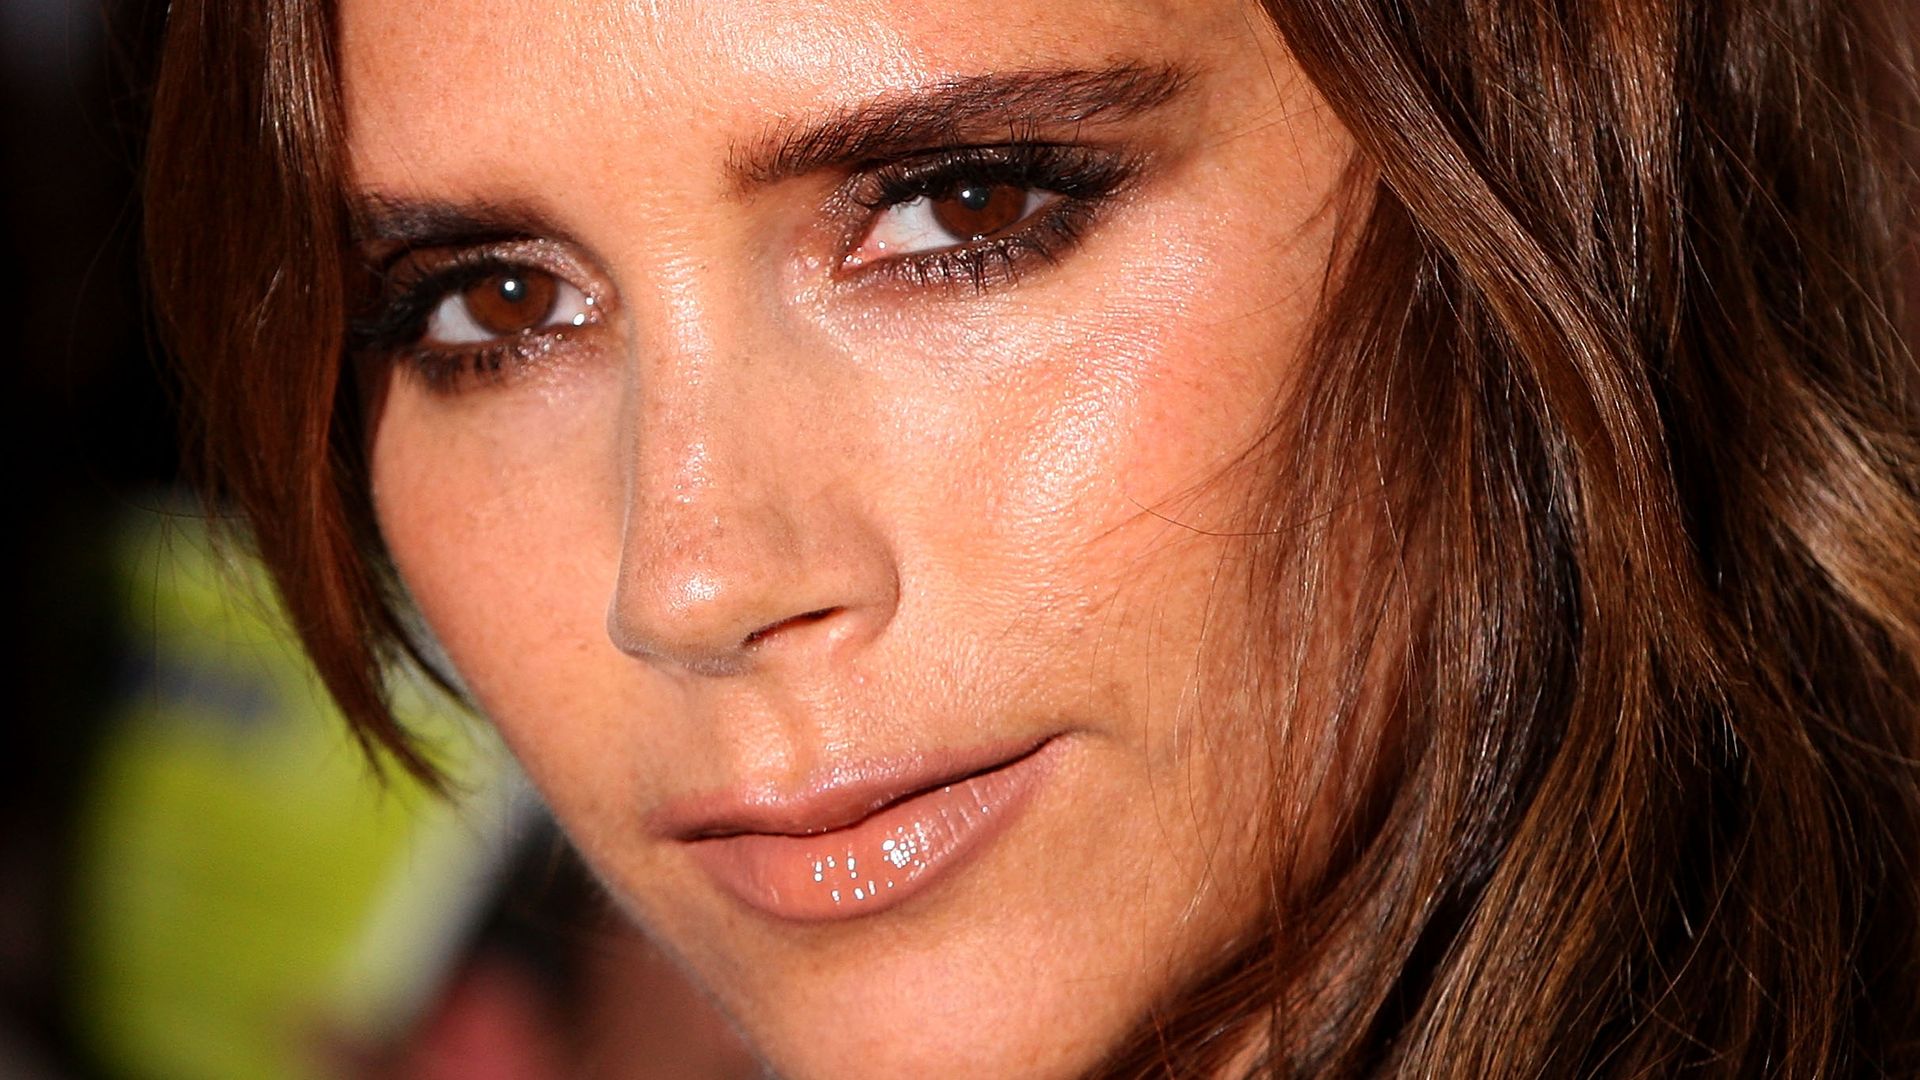 Victoria Beckham attends Glamour Women of the Year Awards 2013 at Berkeley Square Gardens on June 4, 2013 in London, England  